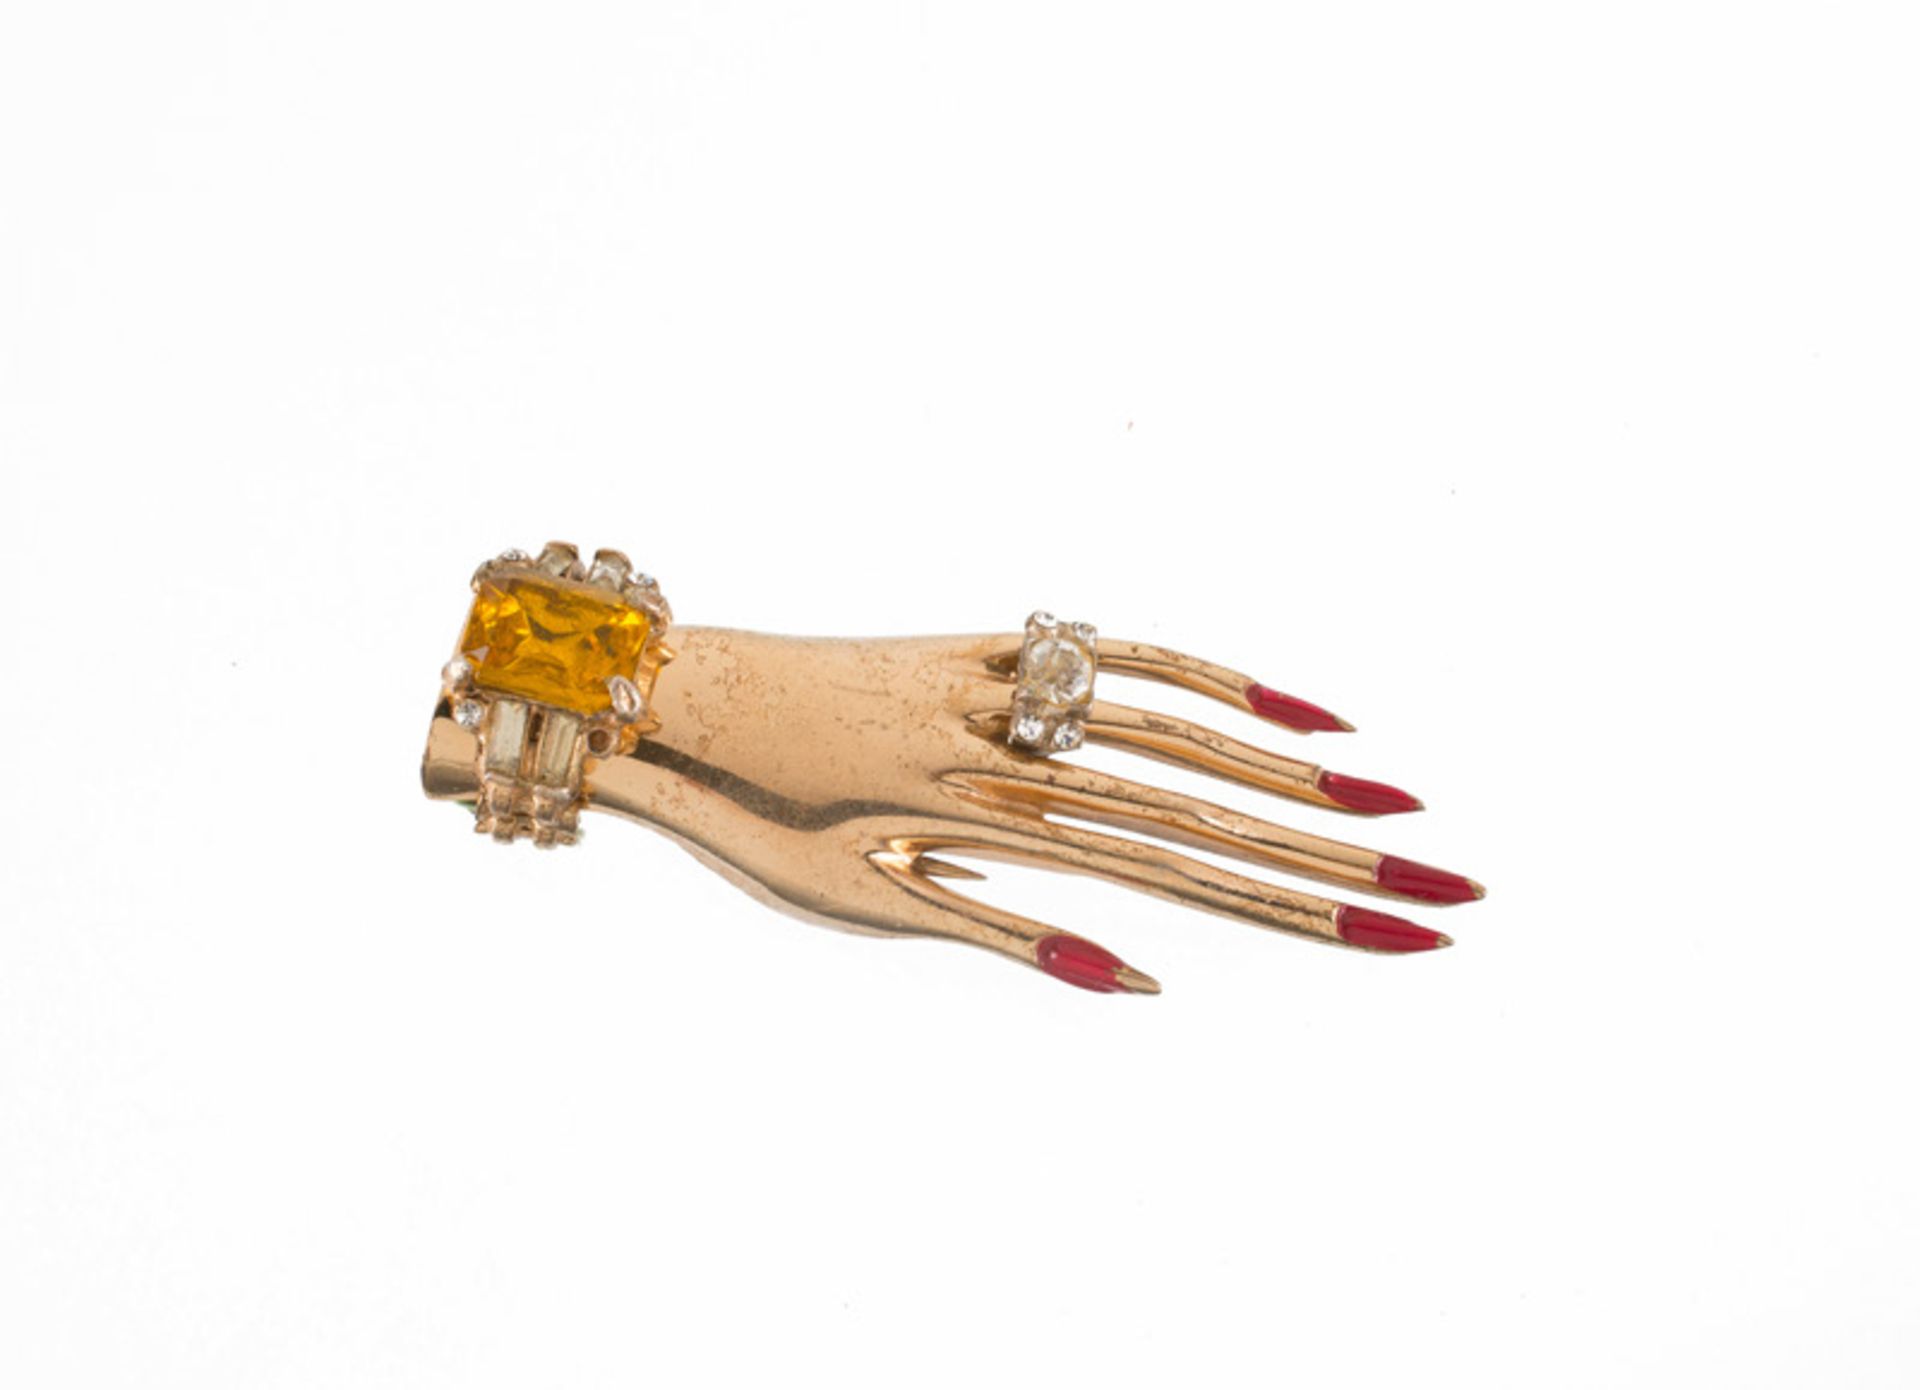 A Coro sterling goldtone brooch in the shape of a hand, wearing a ring. Set with yellow stones, - Image 3 of 3